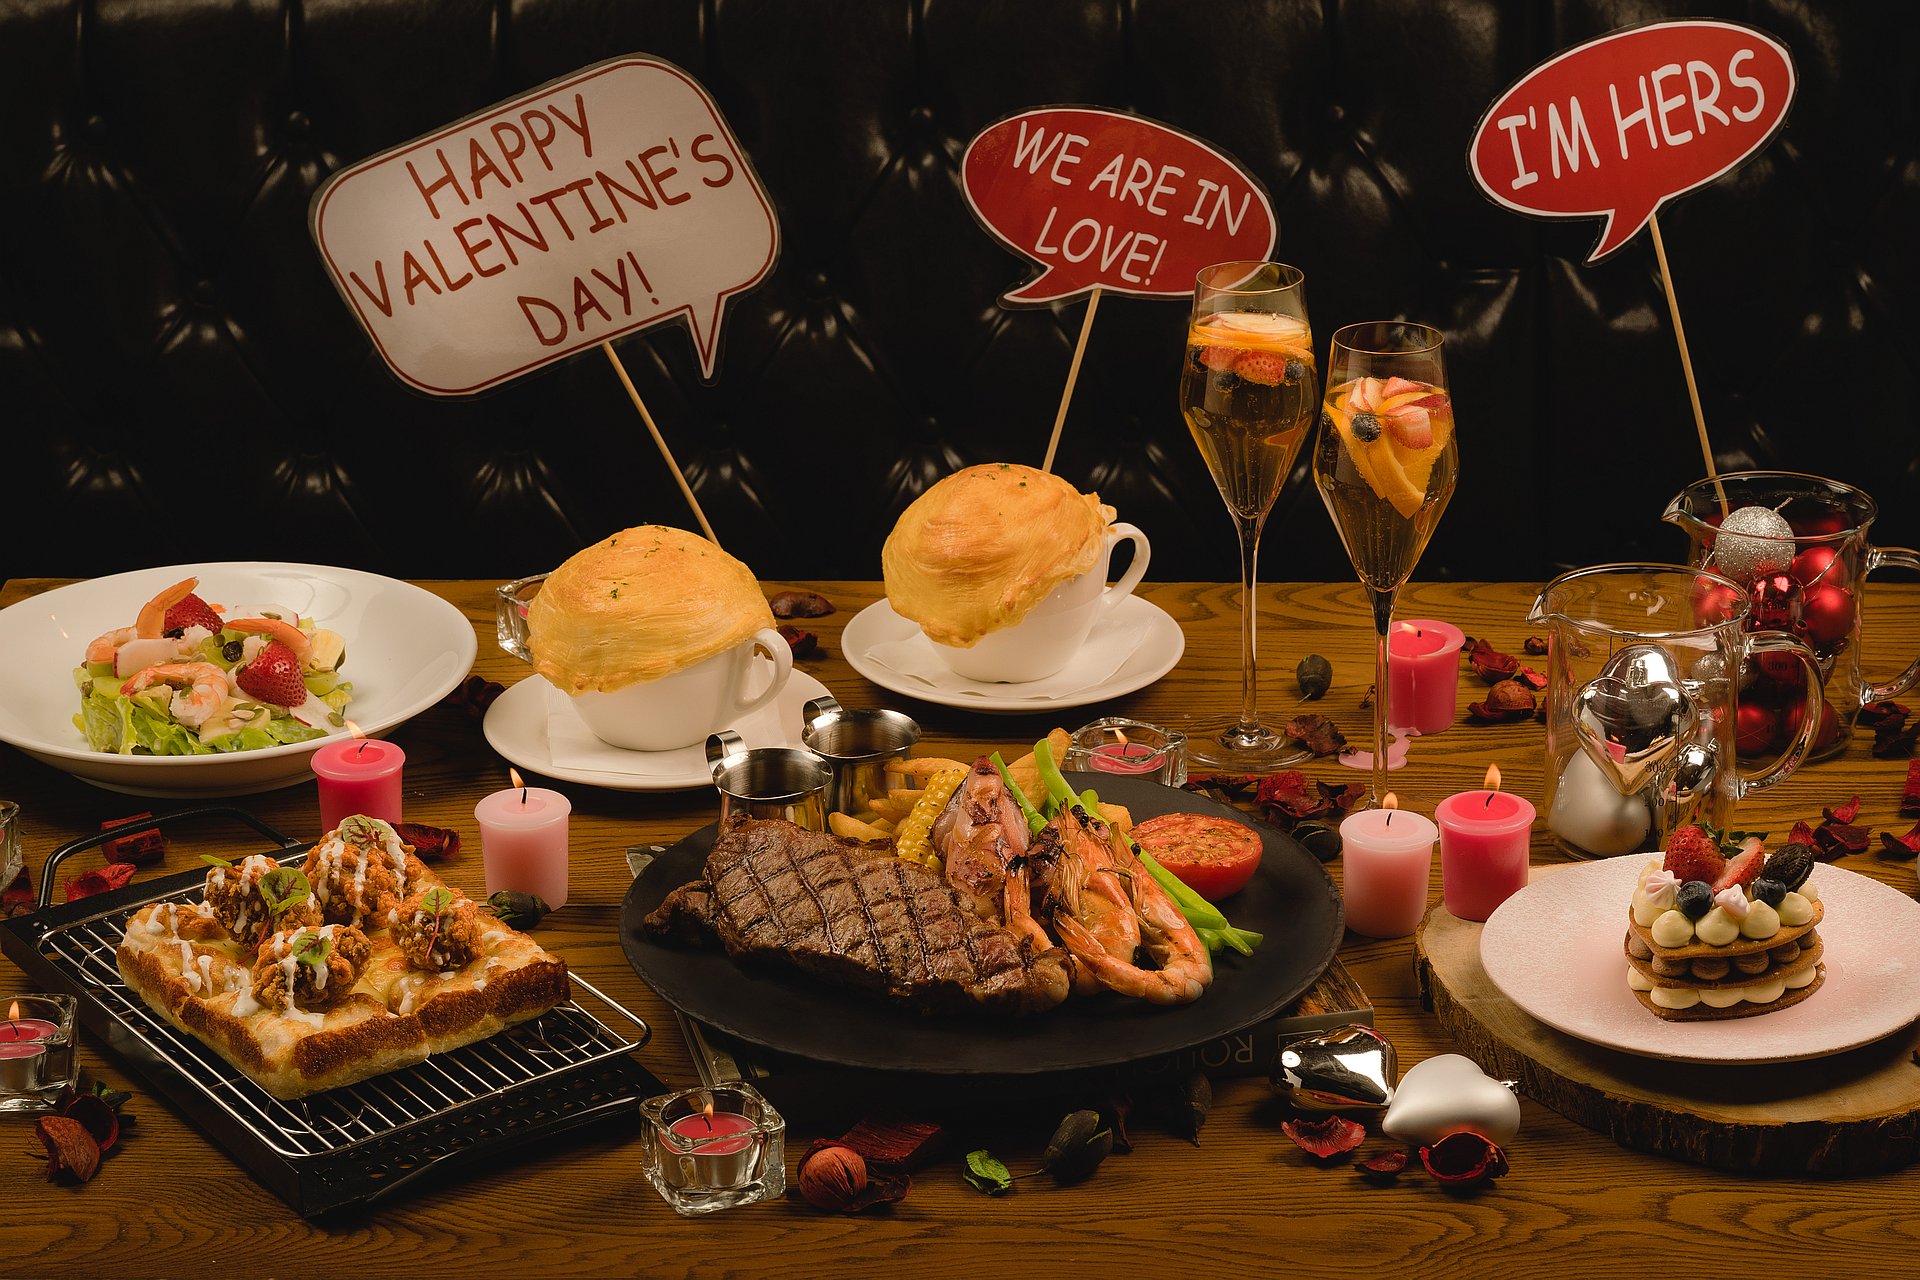 amba Taipei Ximending Hotel chiba Restaurant Valentine's Day Dinner For Two 999 Limited Time Special